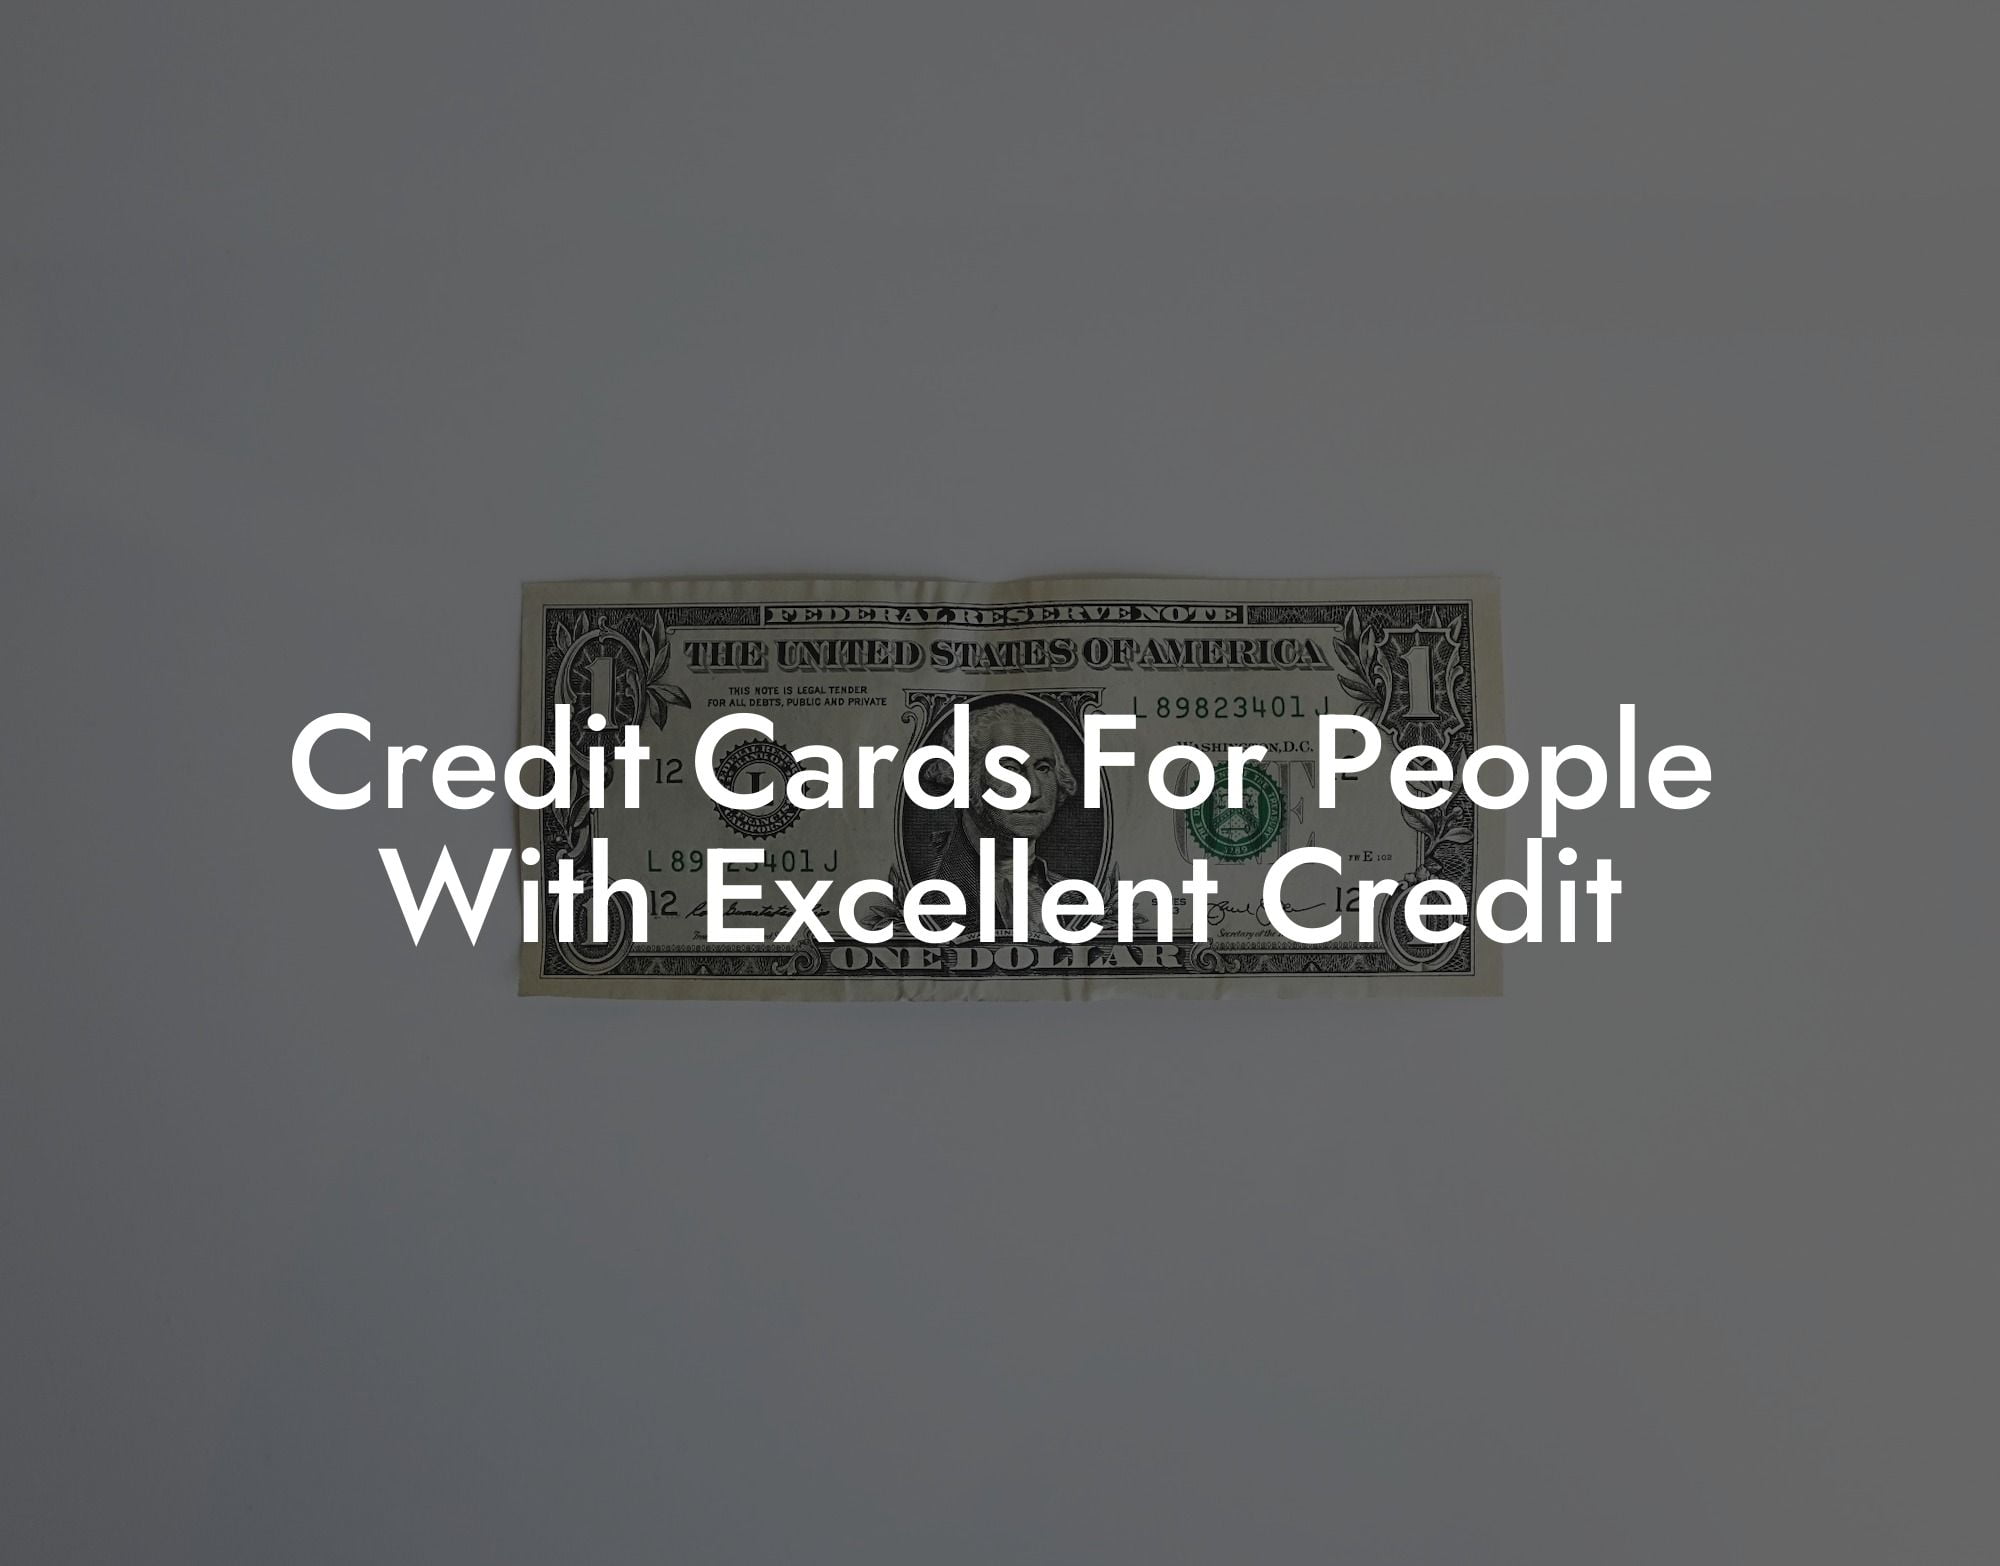 Credit Cards For People With Excellent Credit